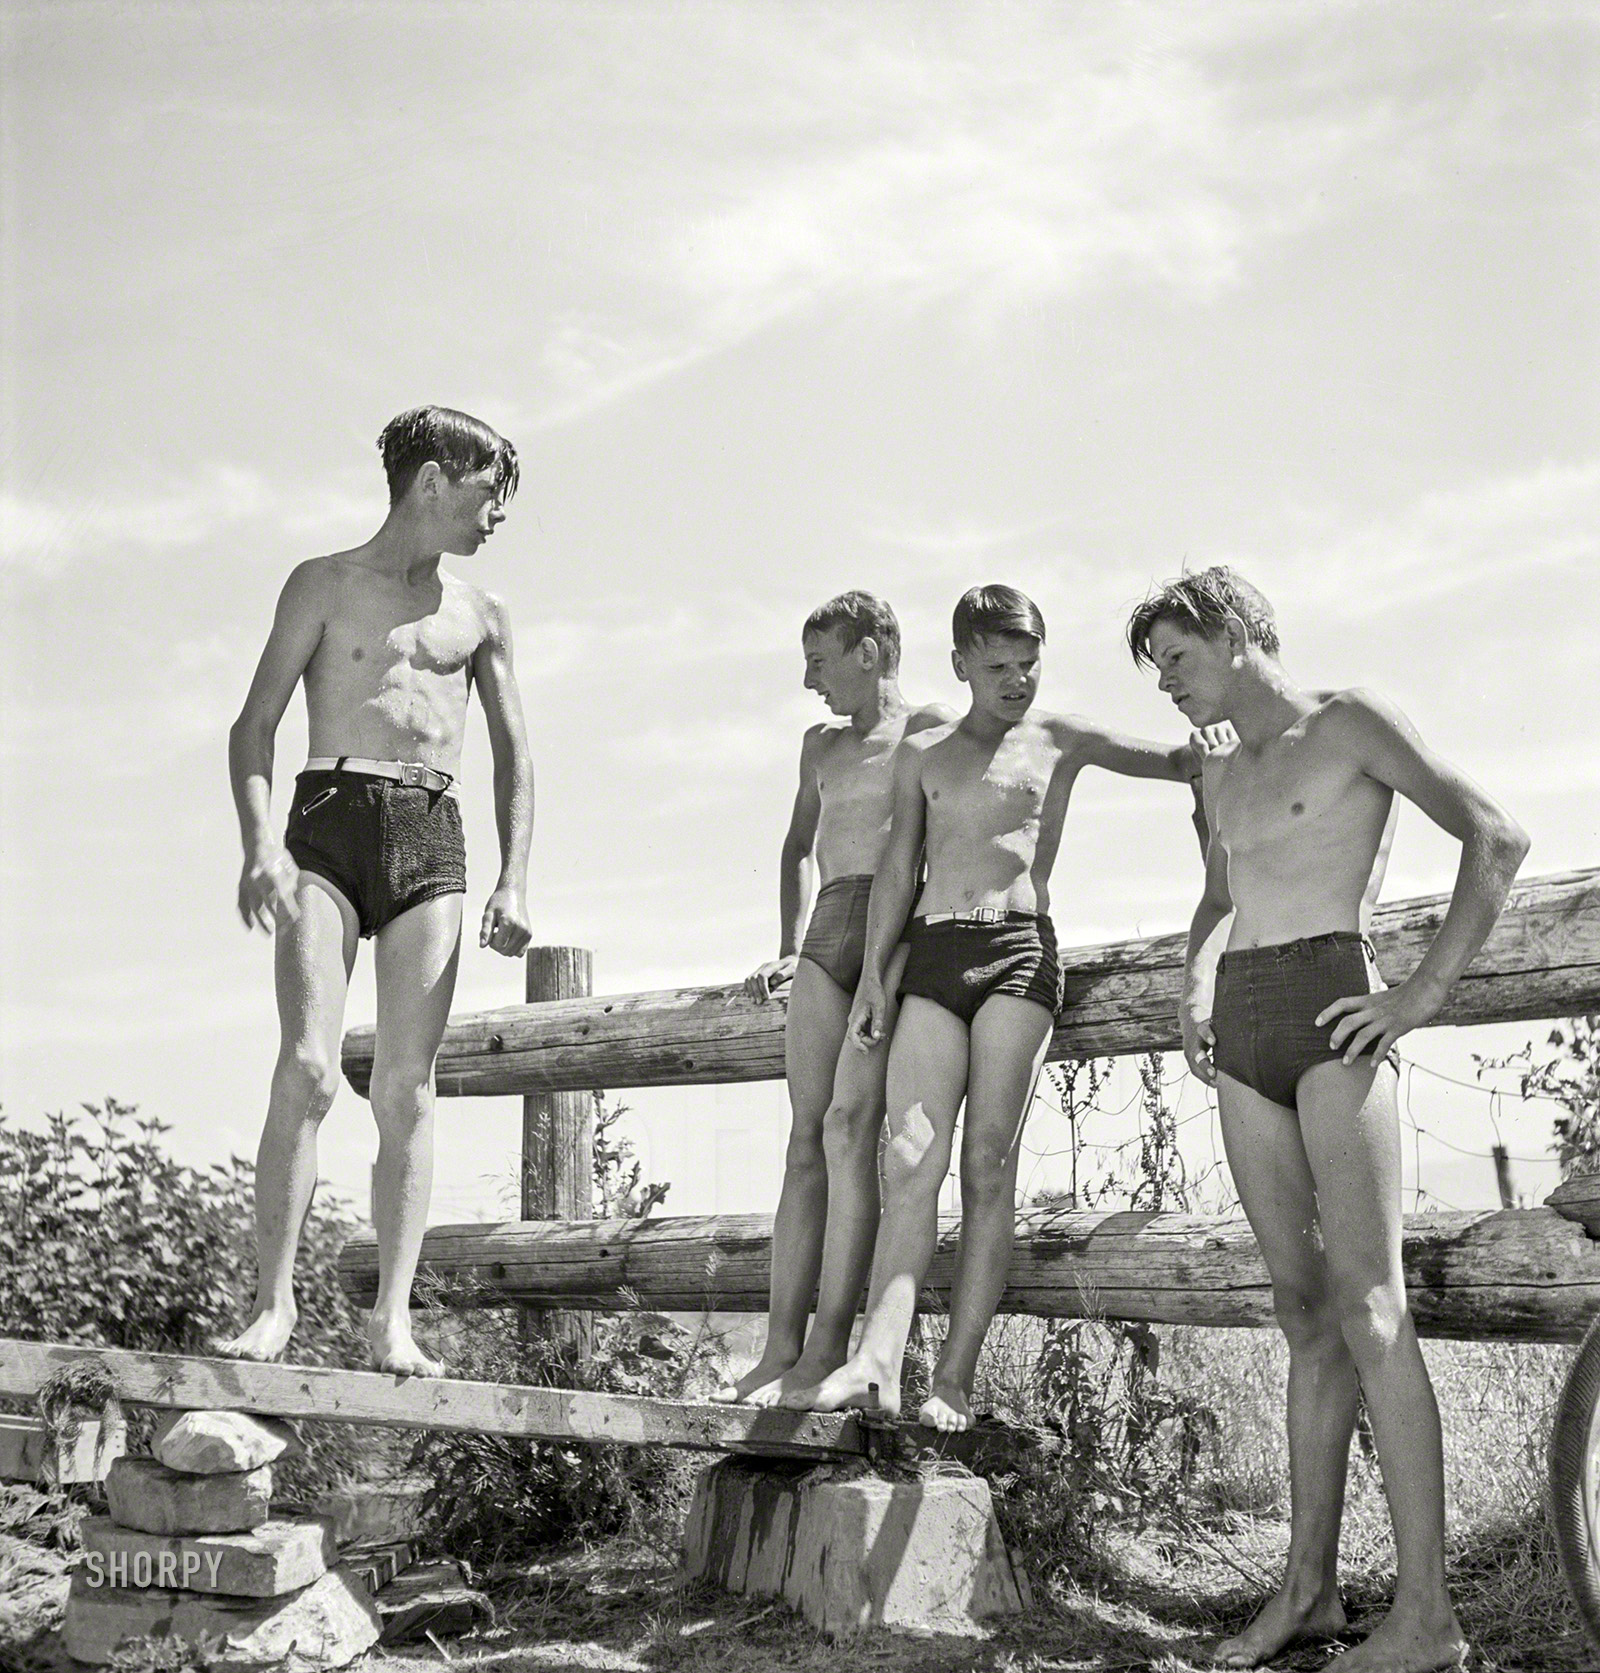 July 1942. "Rupert, Idaho. Schoolboys at swimming pool." Medium format negative by Russell Lee for the Office of War Information. View full size.